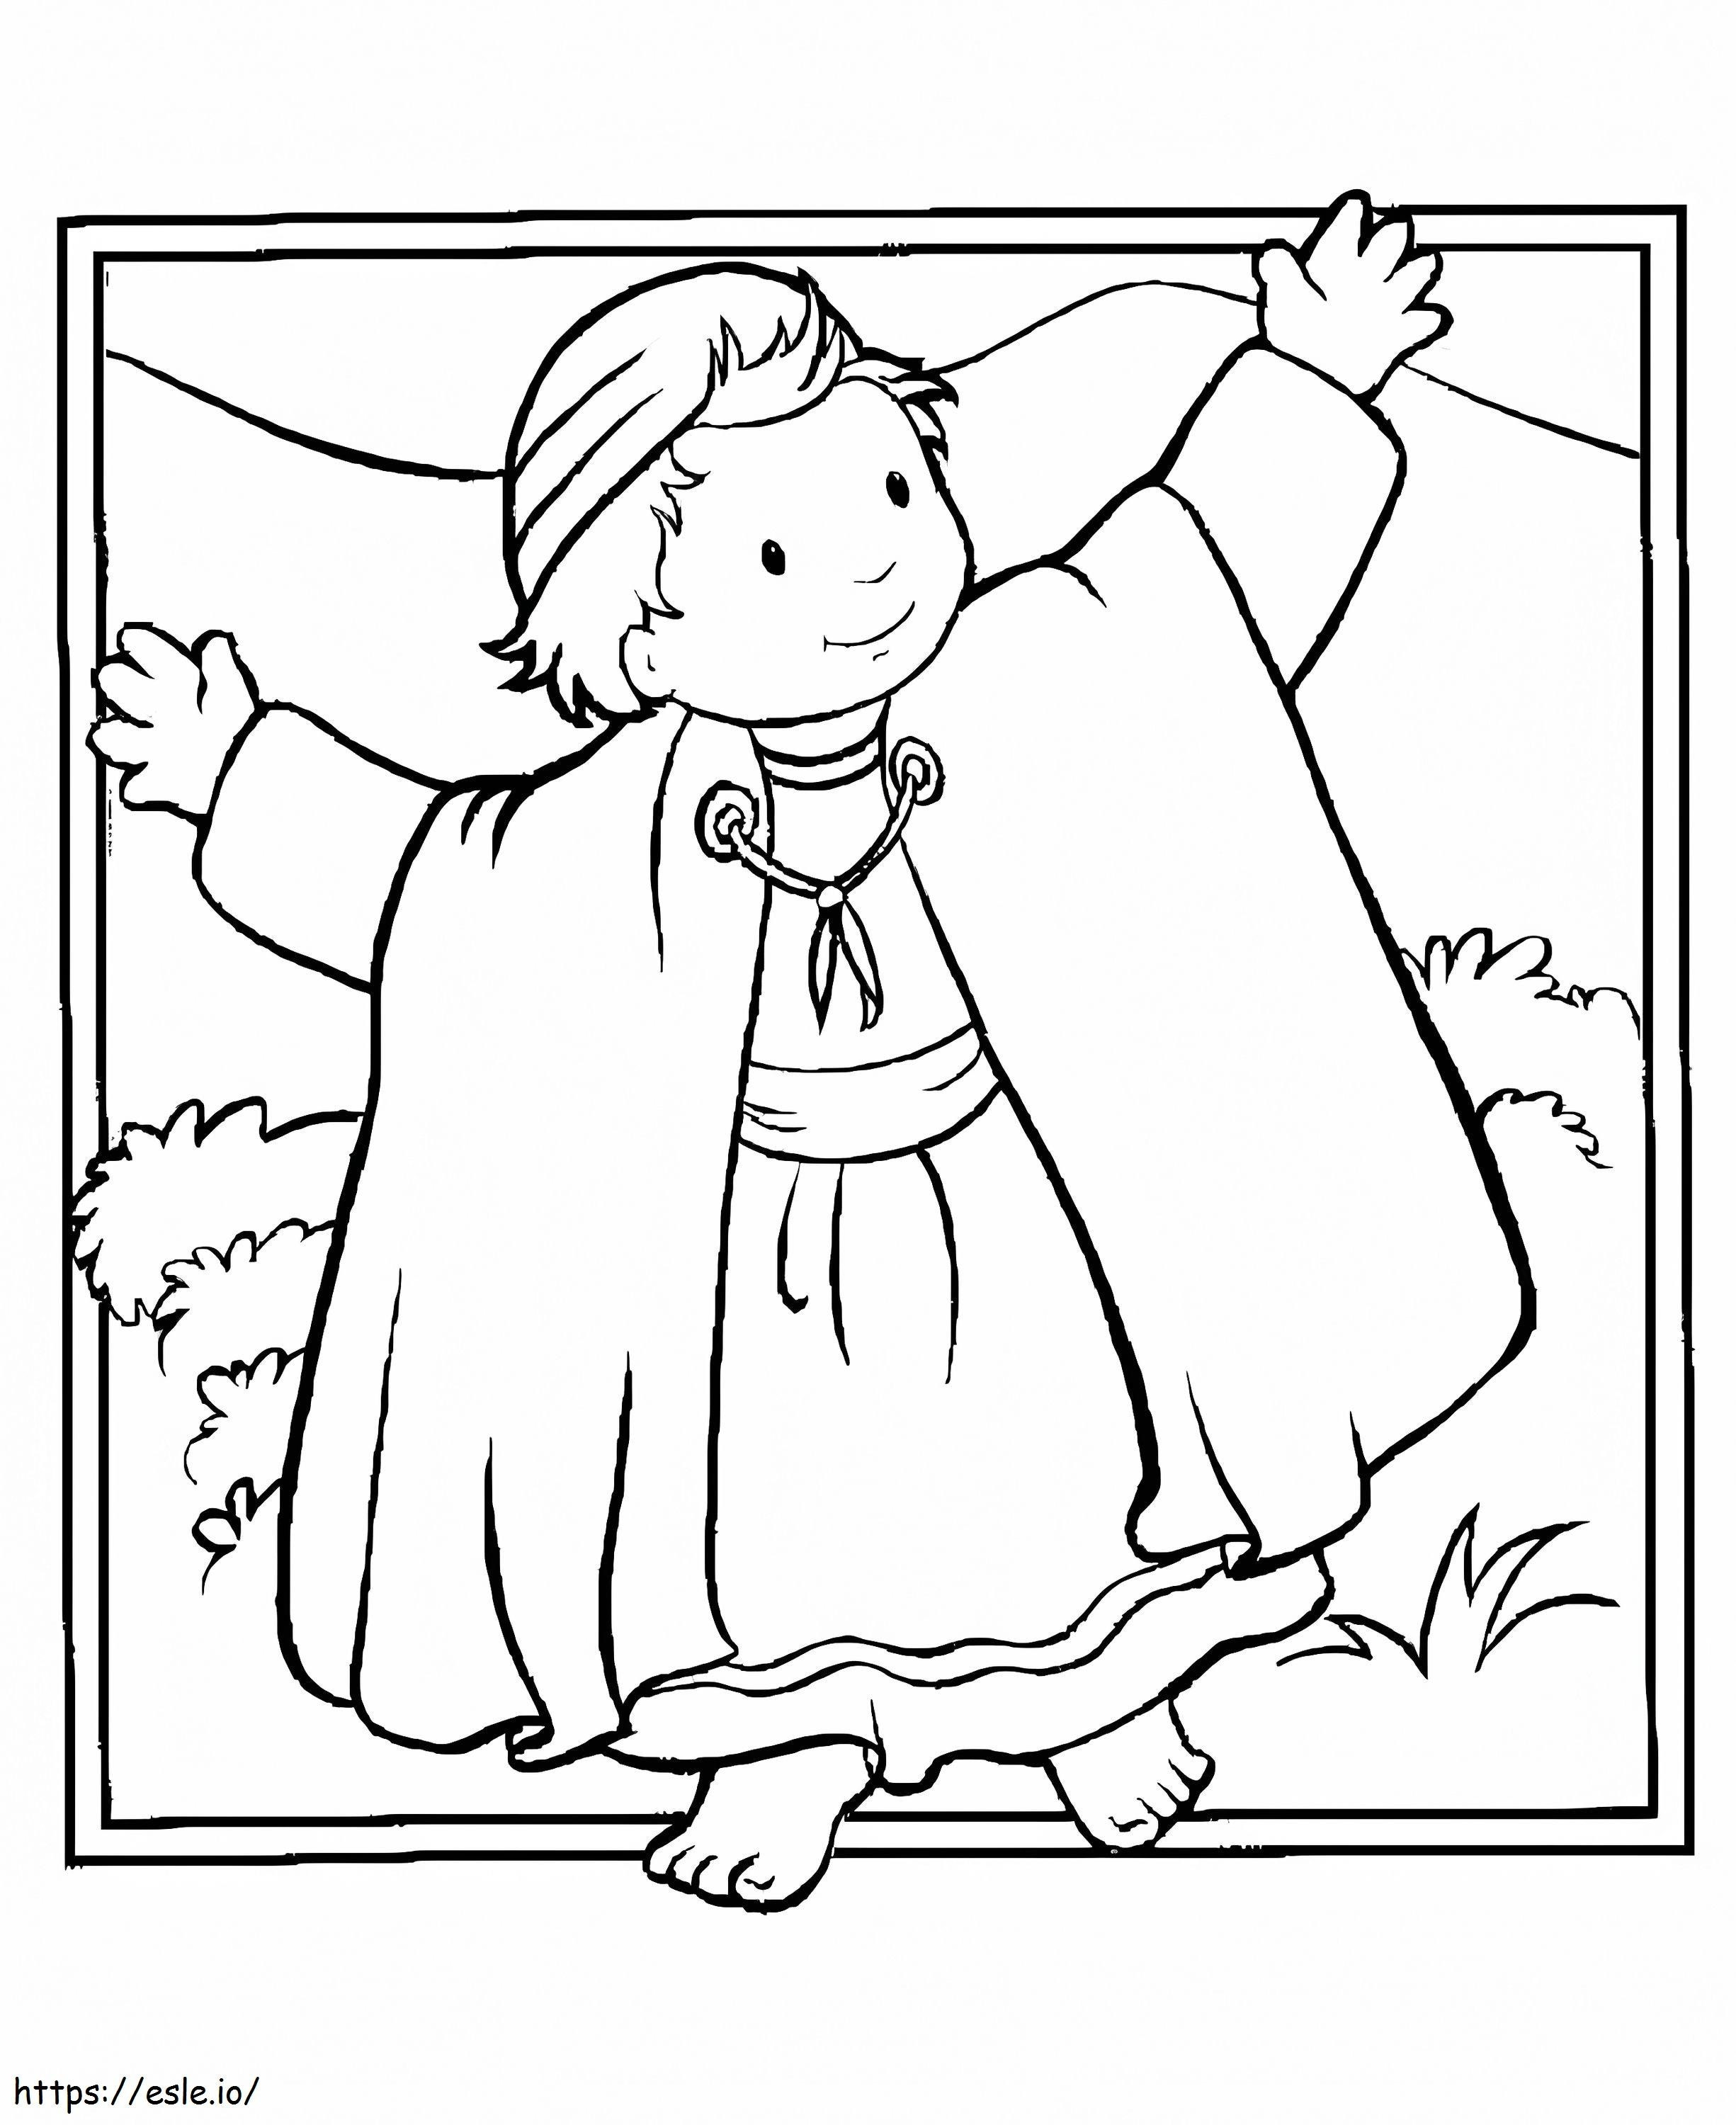 Joseph And Coat coloring page